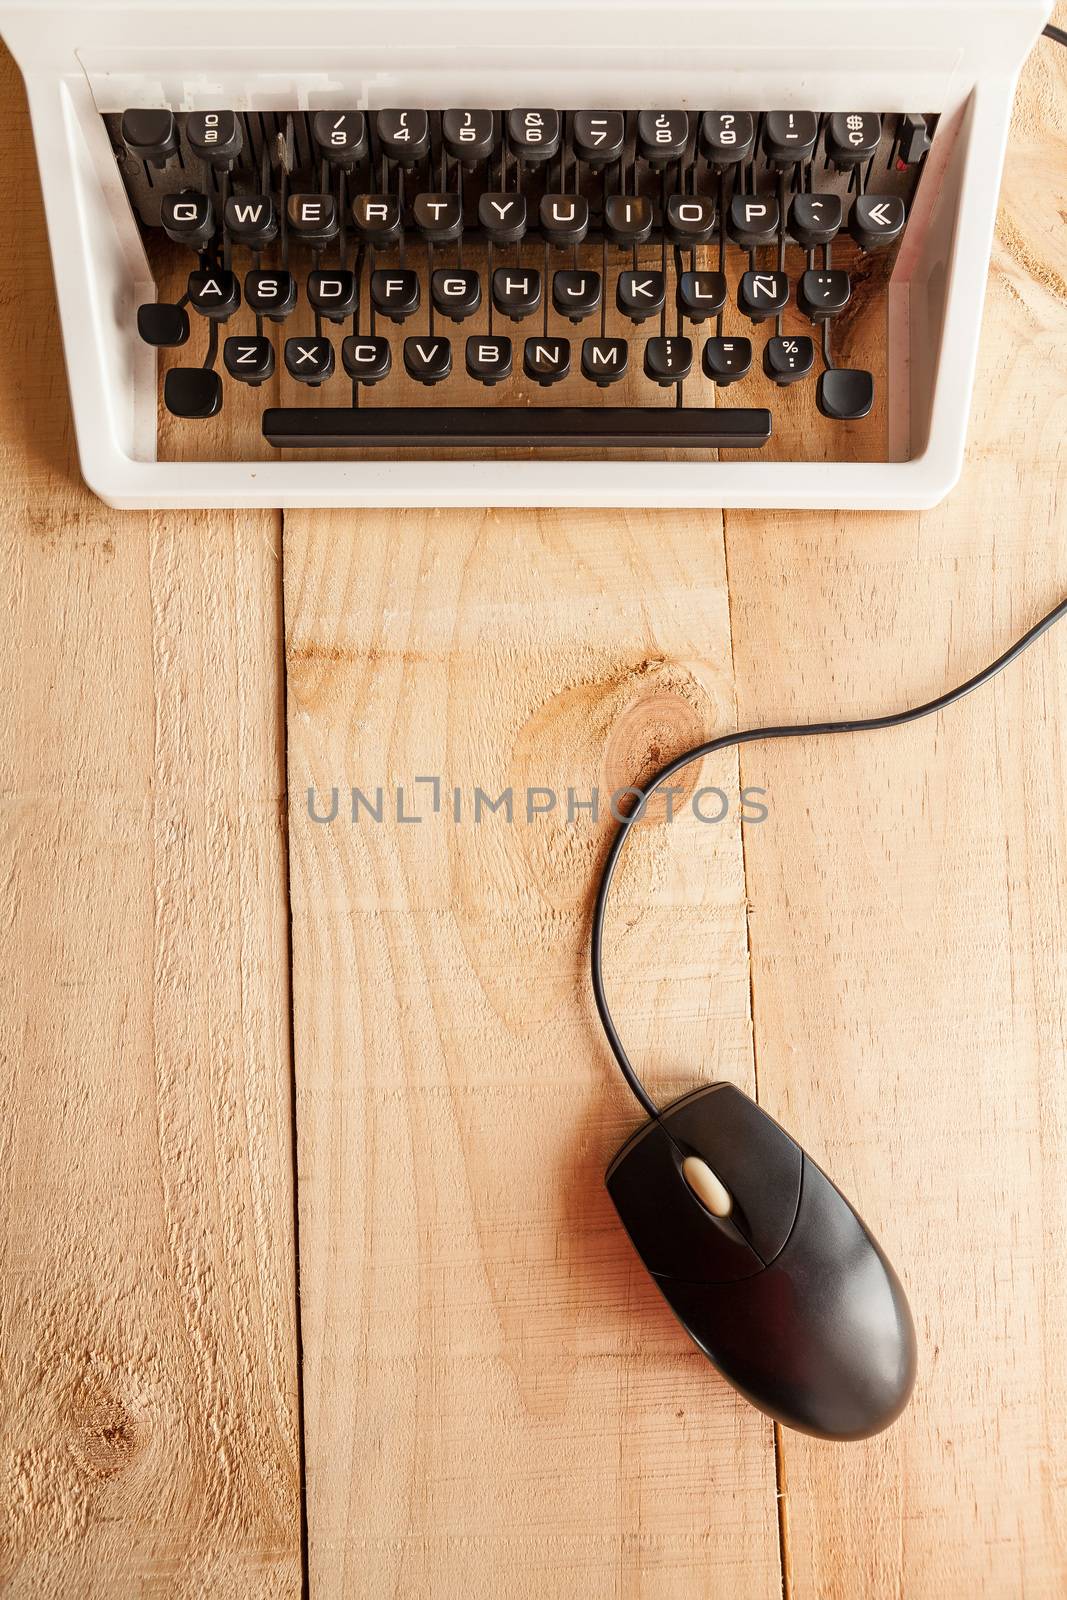 The image shows an antique typewriter connected to a computer mouse imitating a laptop and conceptualizing the obsolescence of technology